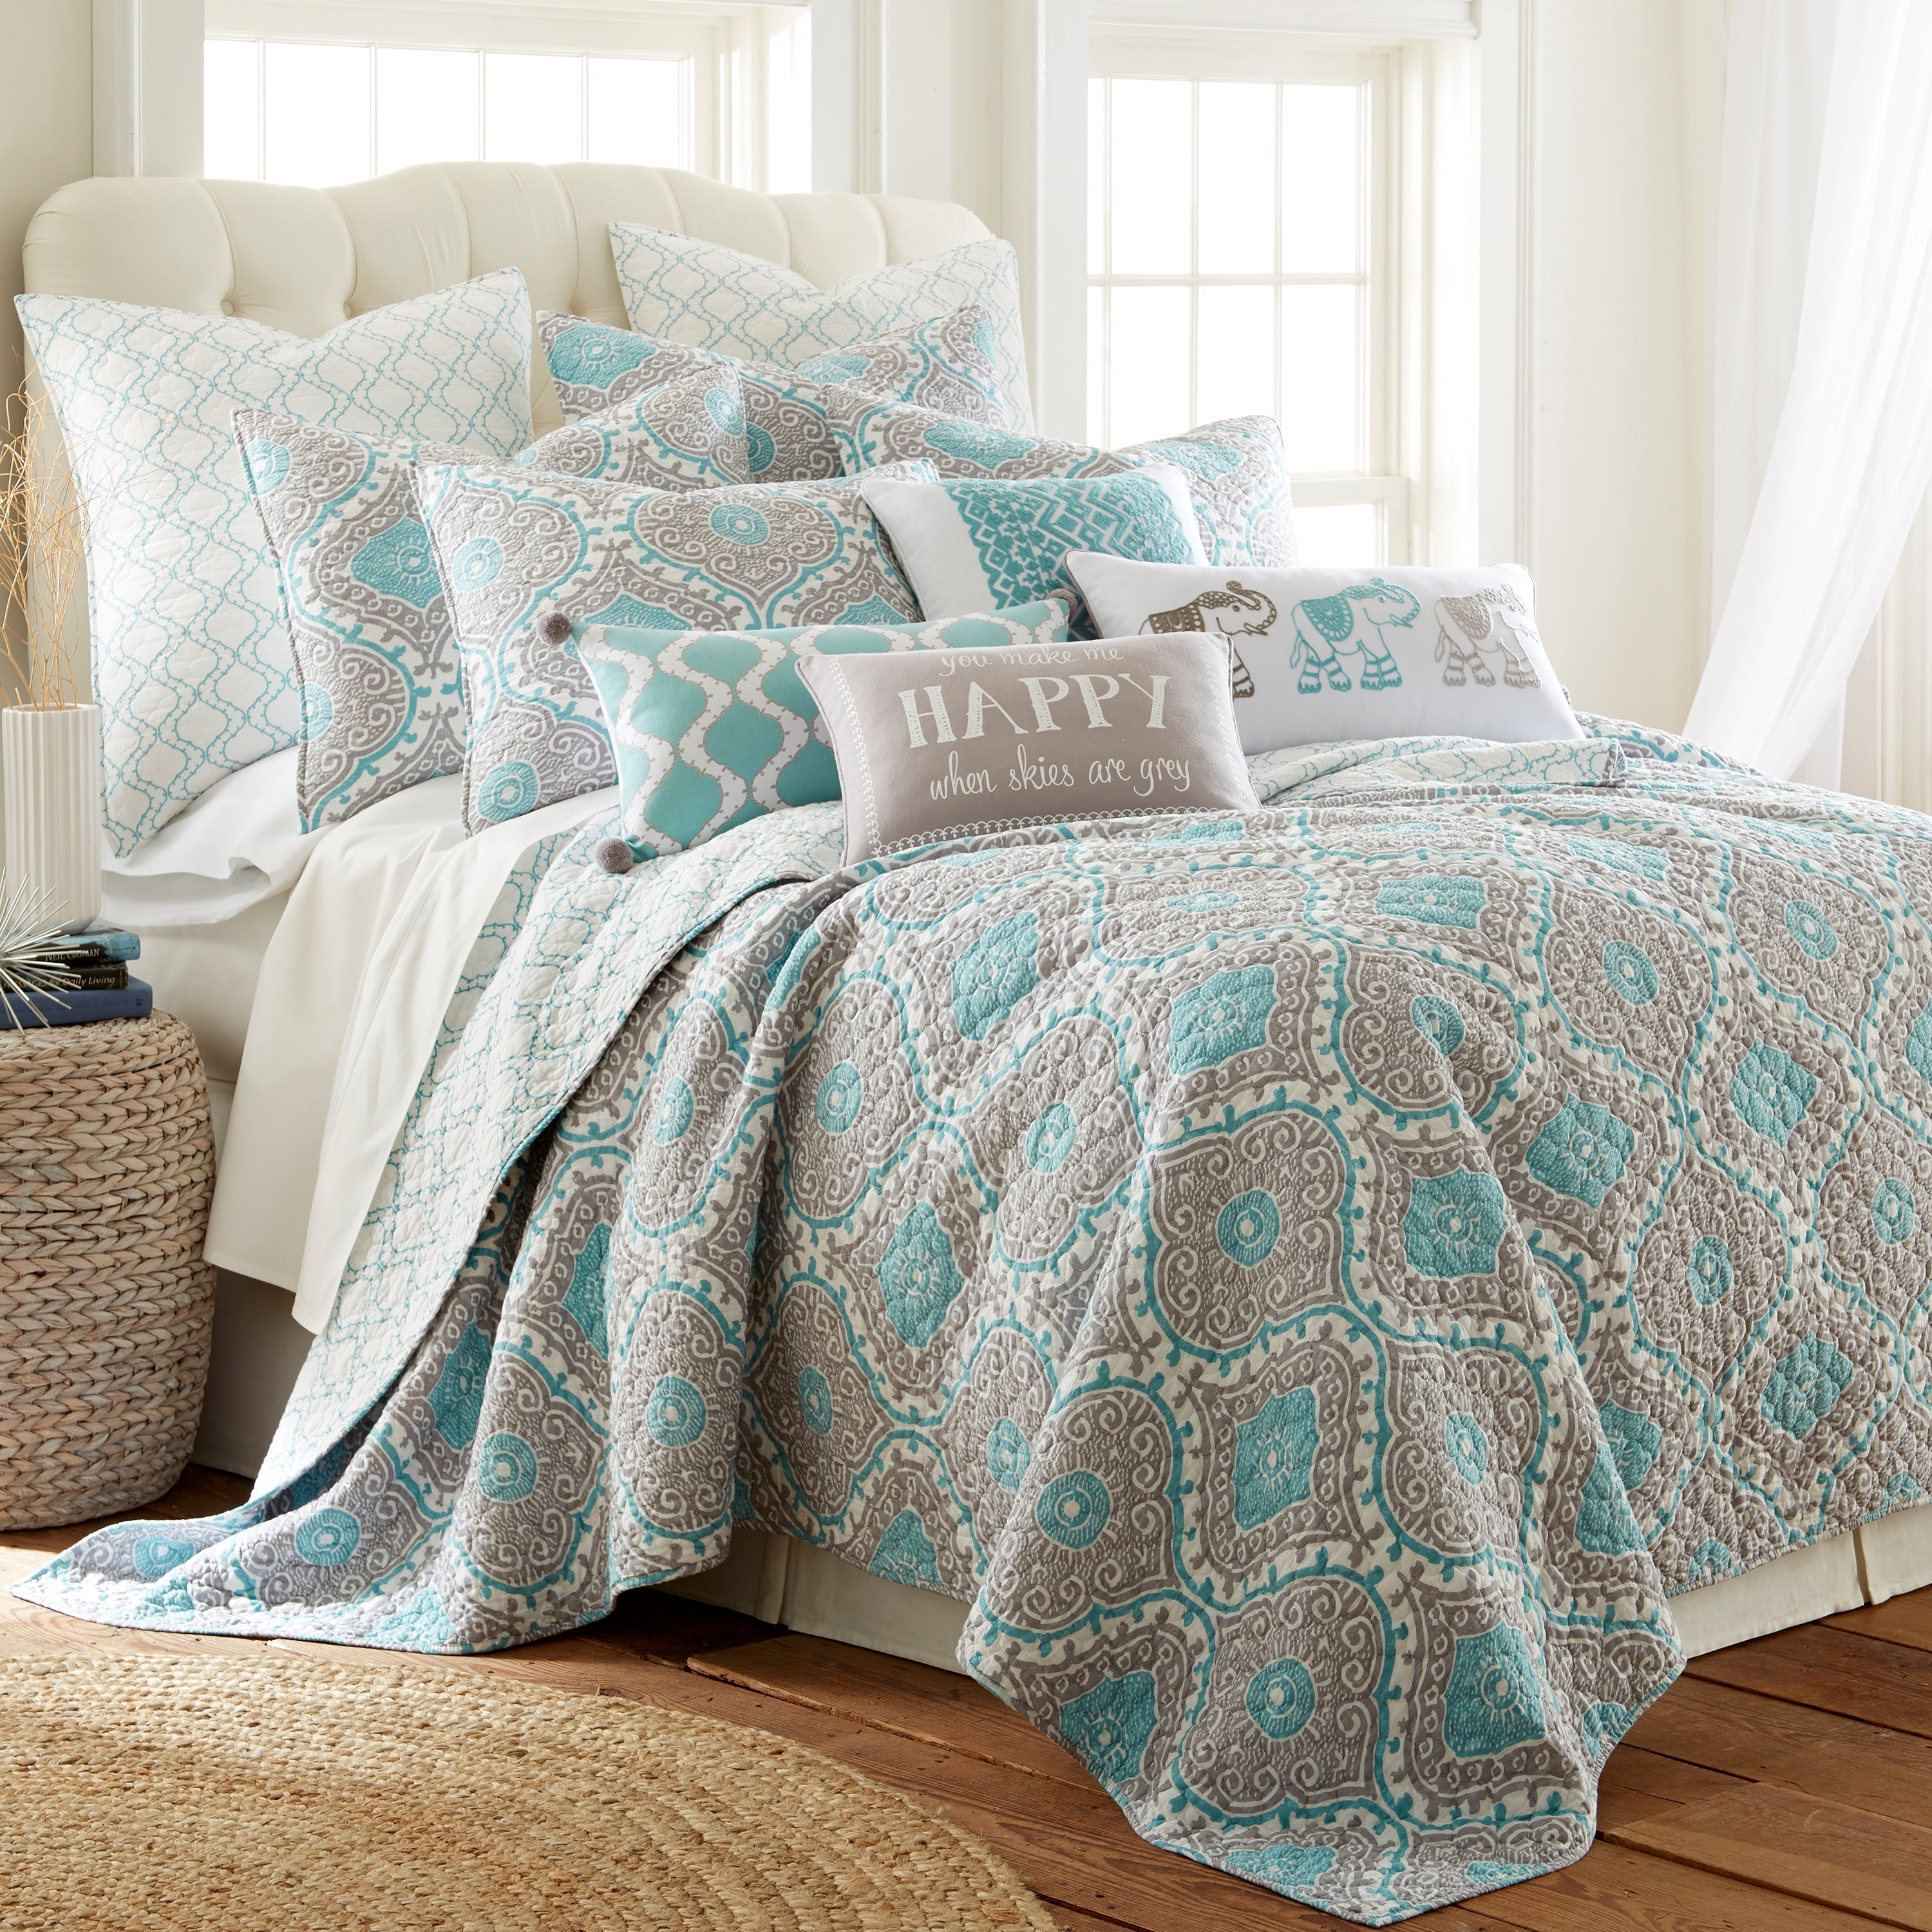 Gramercy Teal Happy Pillow